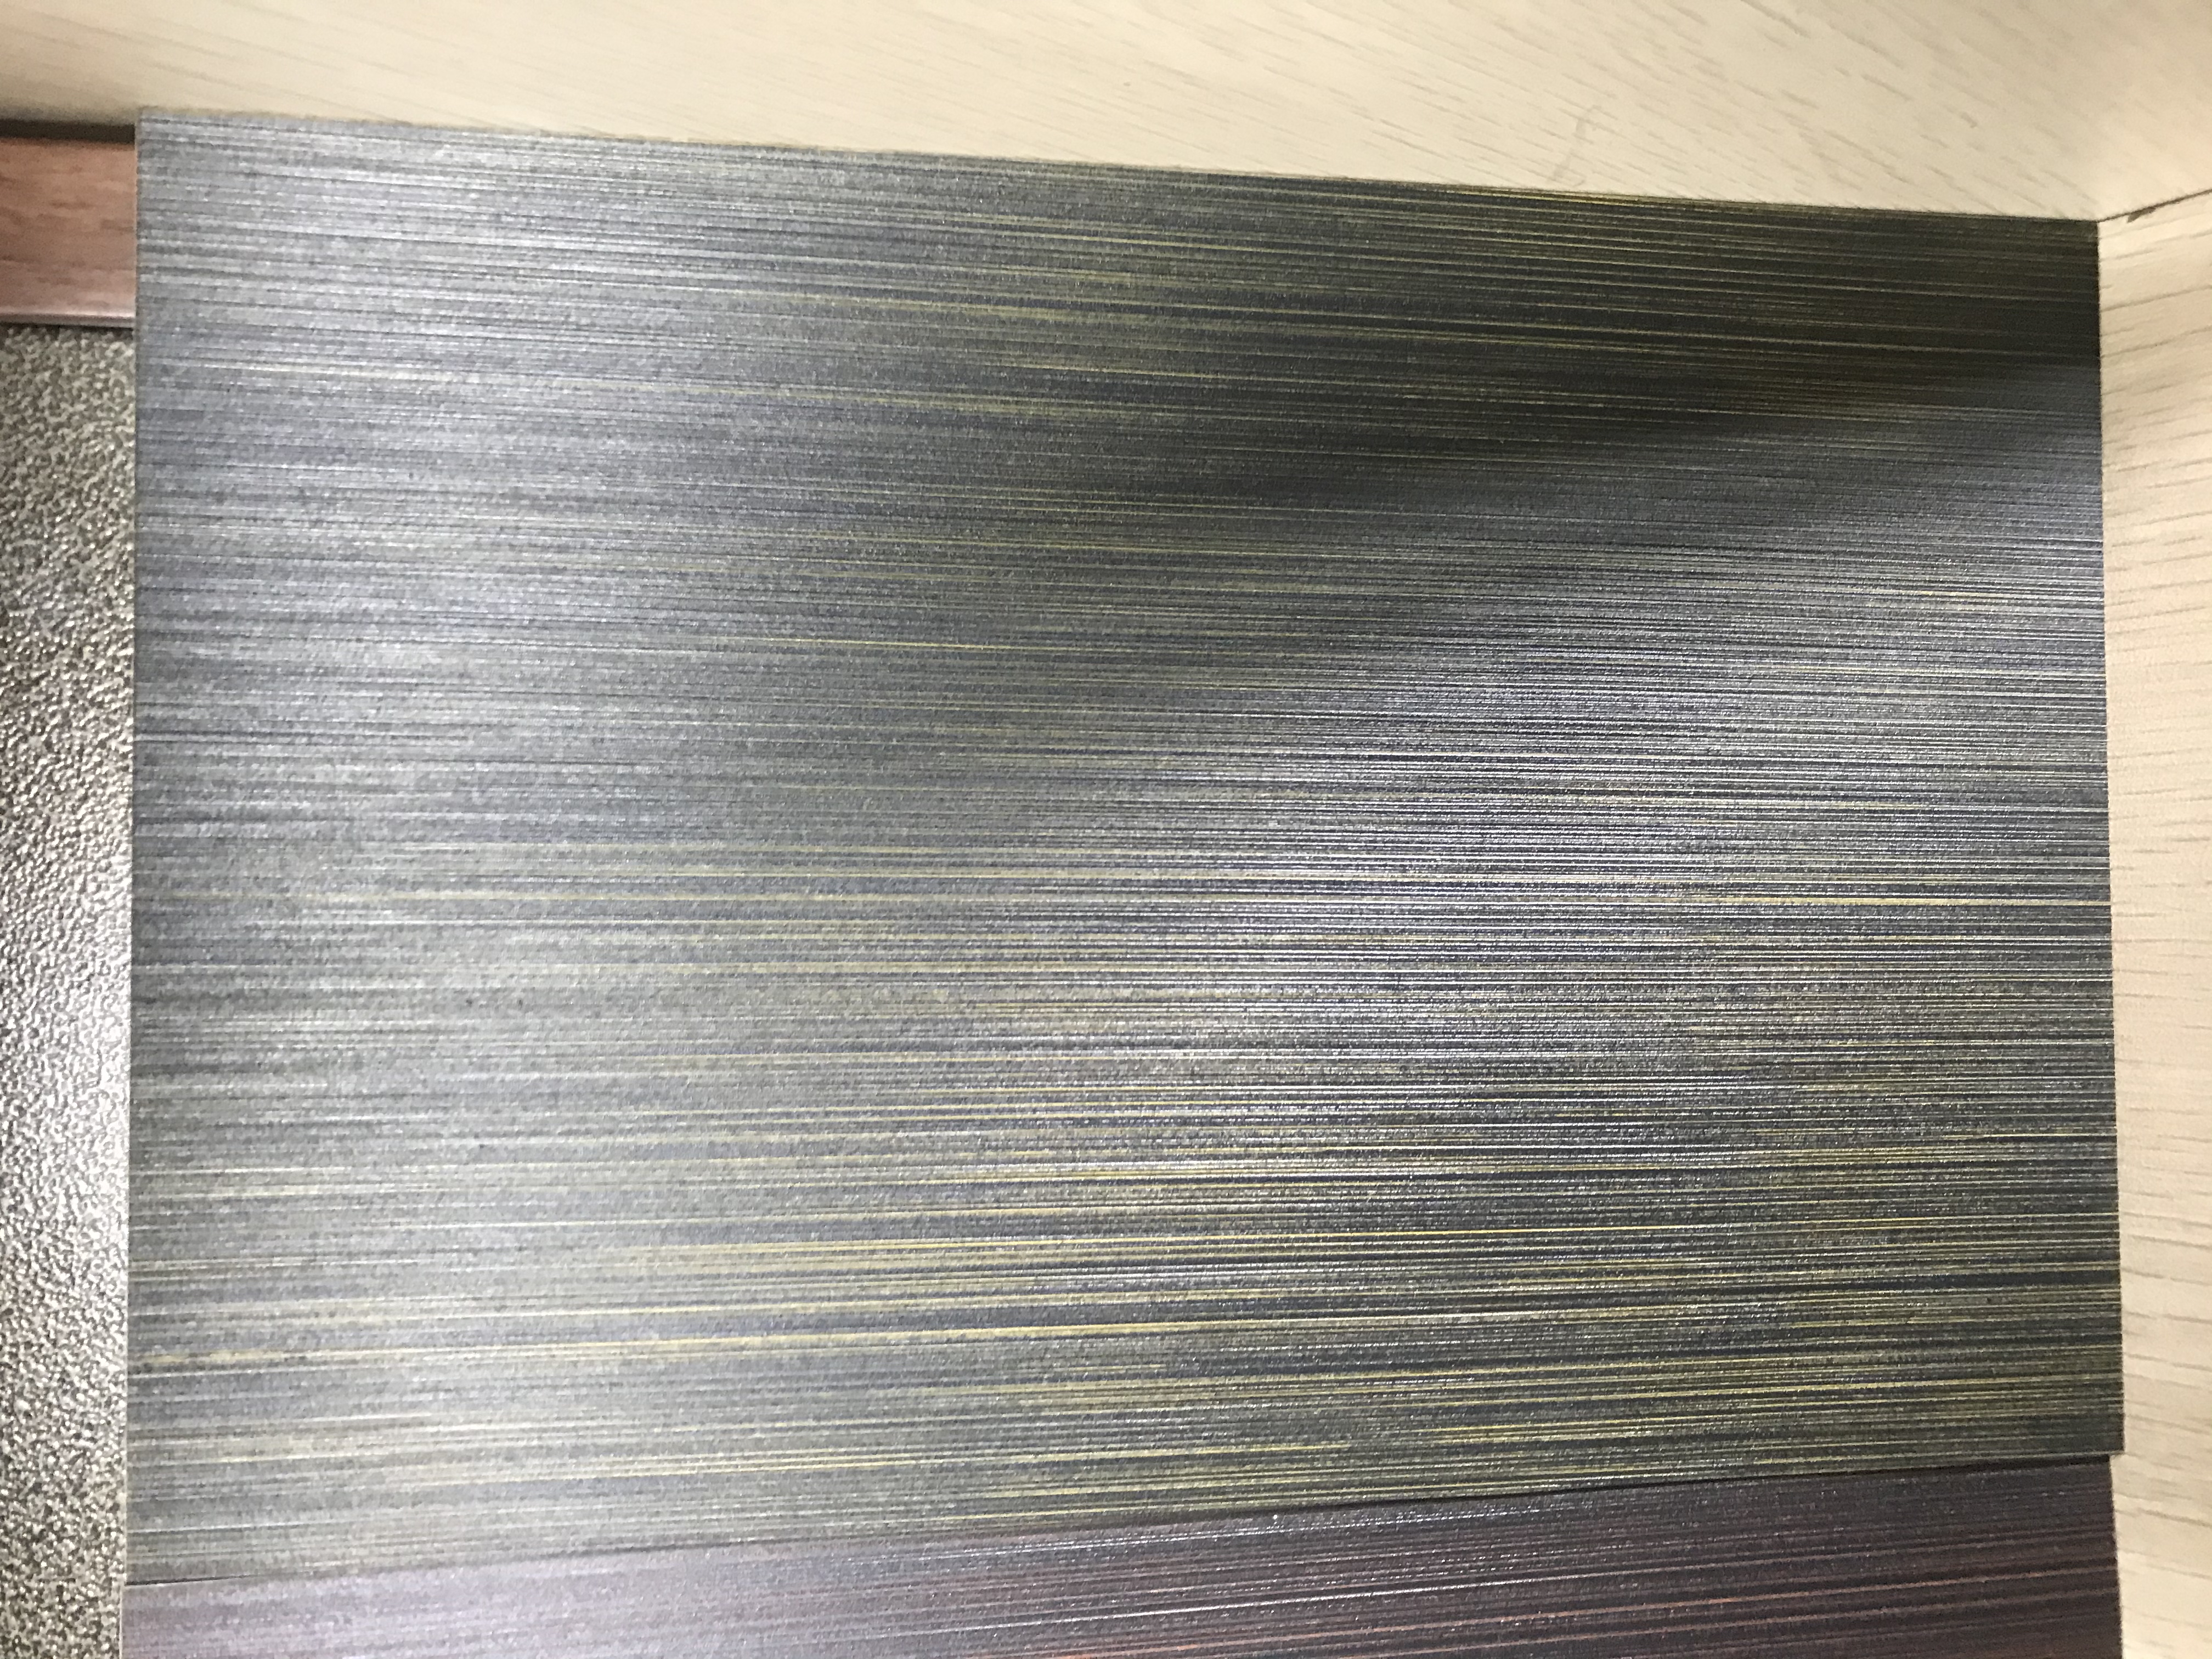 High Quality Transfer Printing Stainless Steel Sheet For Room Decoration Featured Image